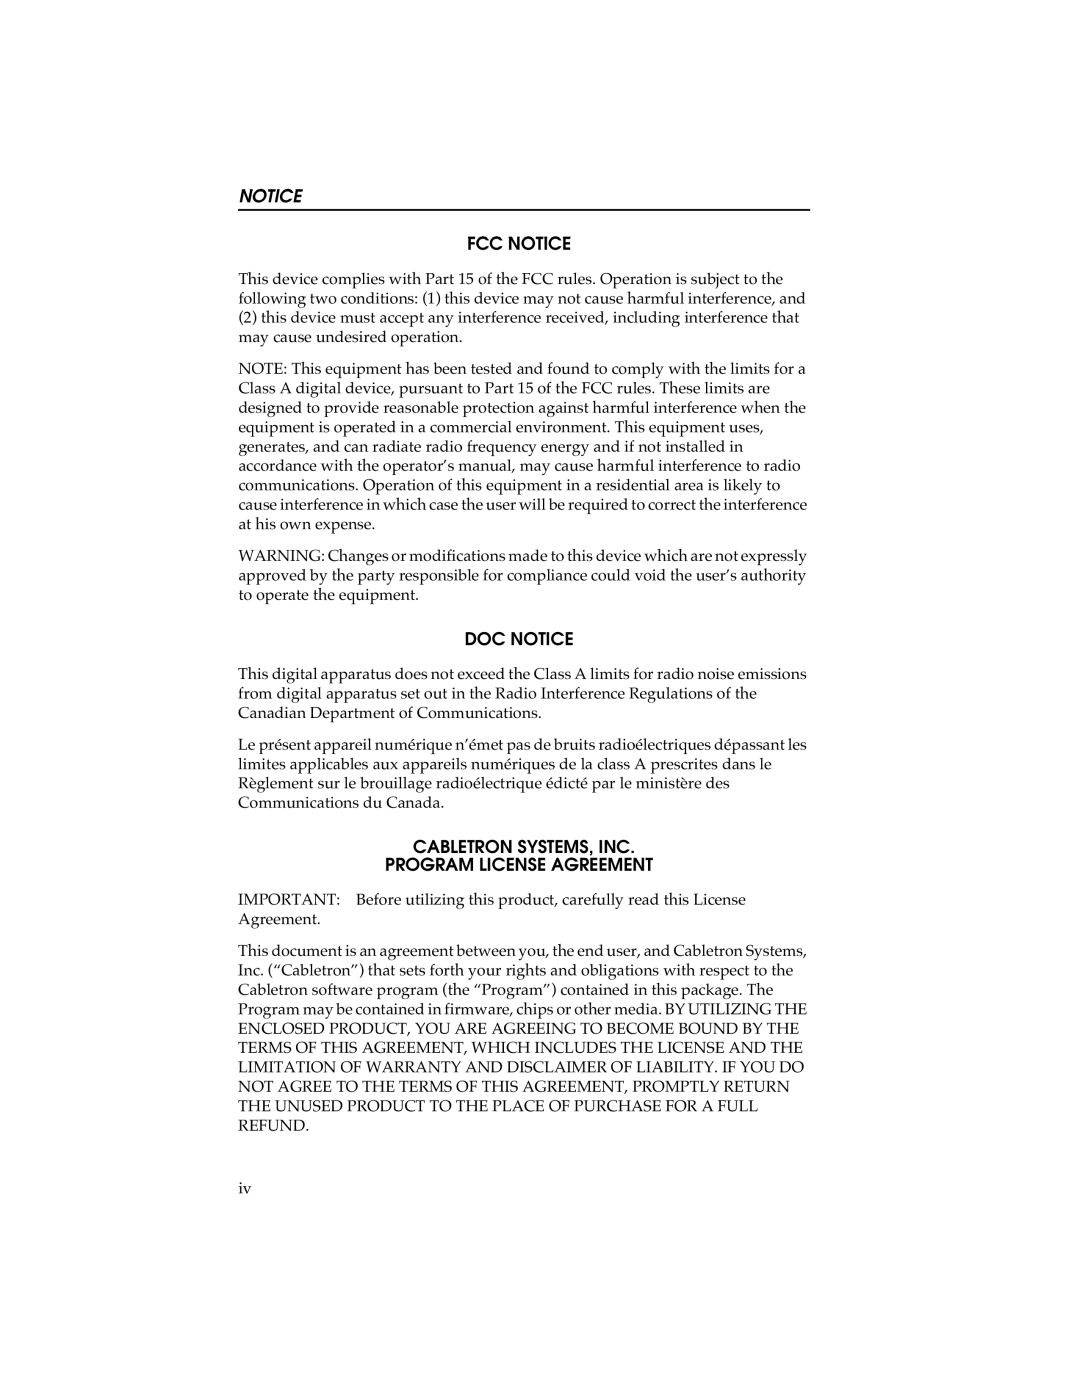 Cabletron Systems STHI manual Fcc Notice, Doc Notice, Cabletron Systems, Inc, Program License Agreement 